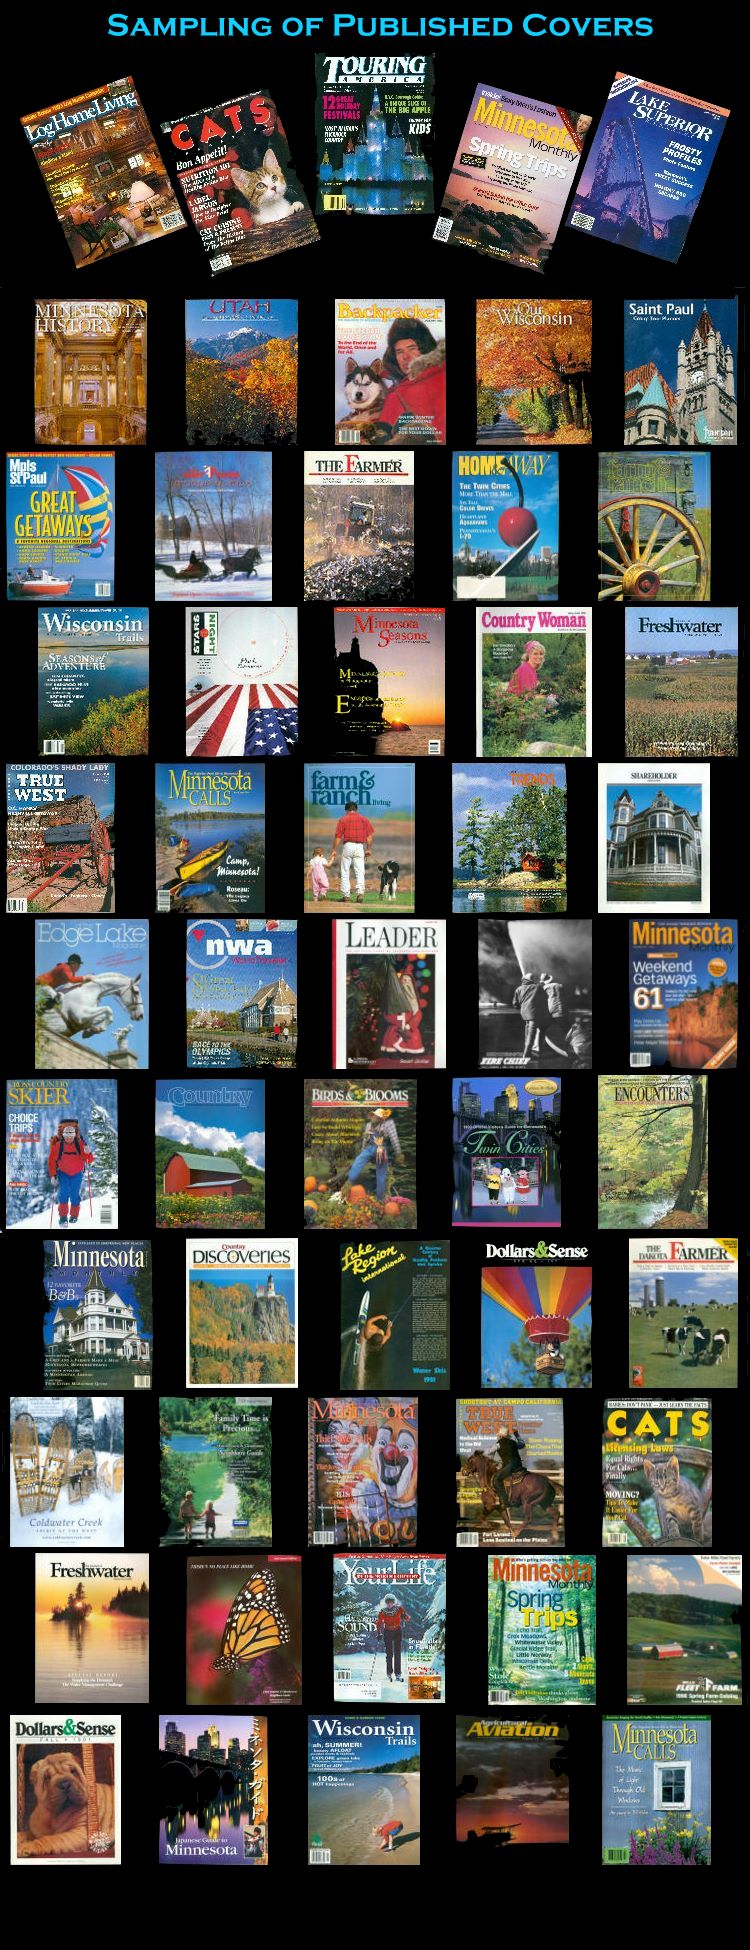 Sampling of Published Covers